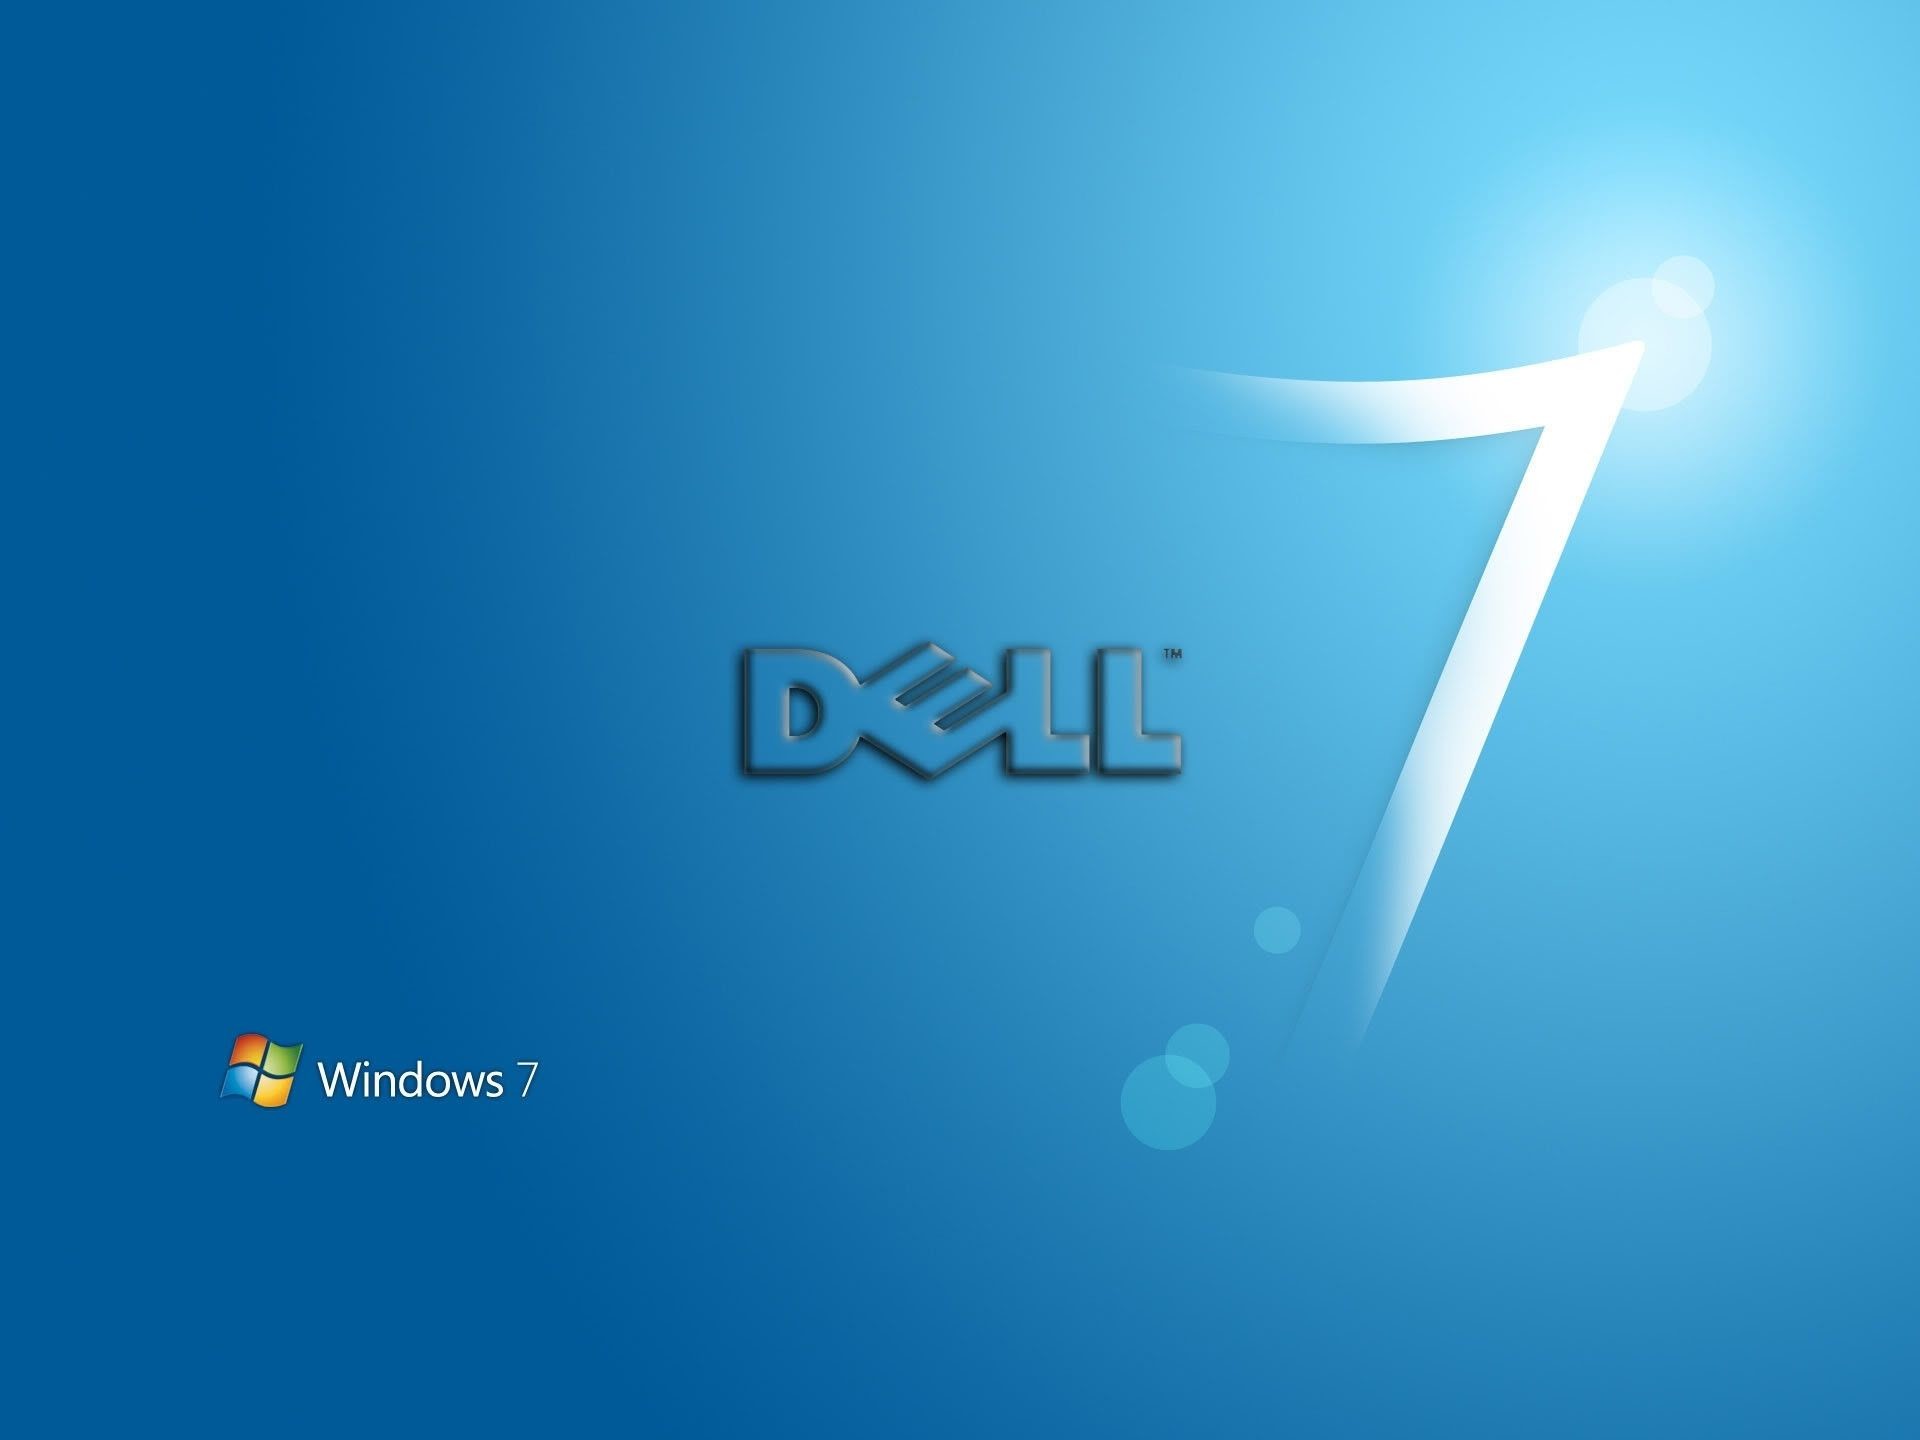 Dell Wallpaper Windows 7 (71+ images)